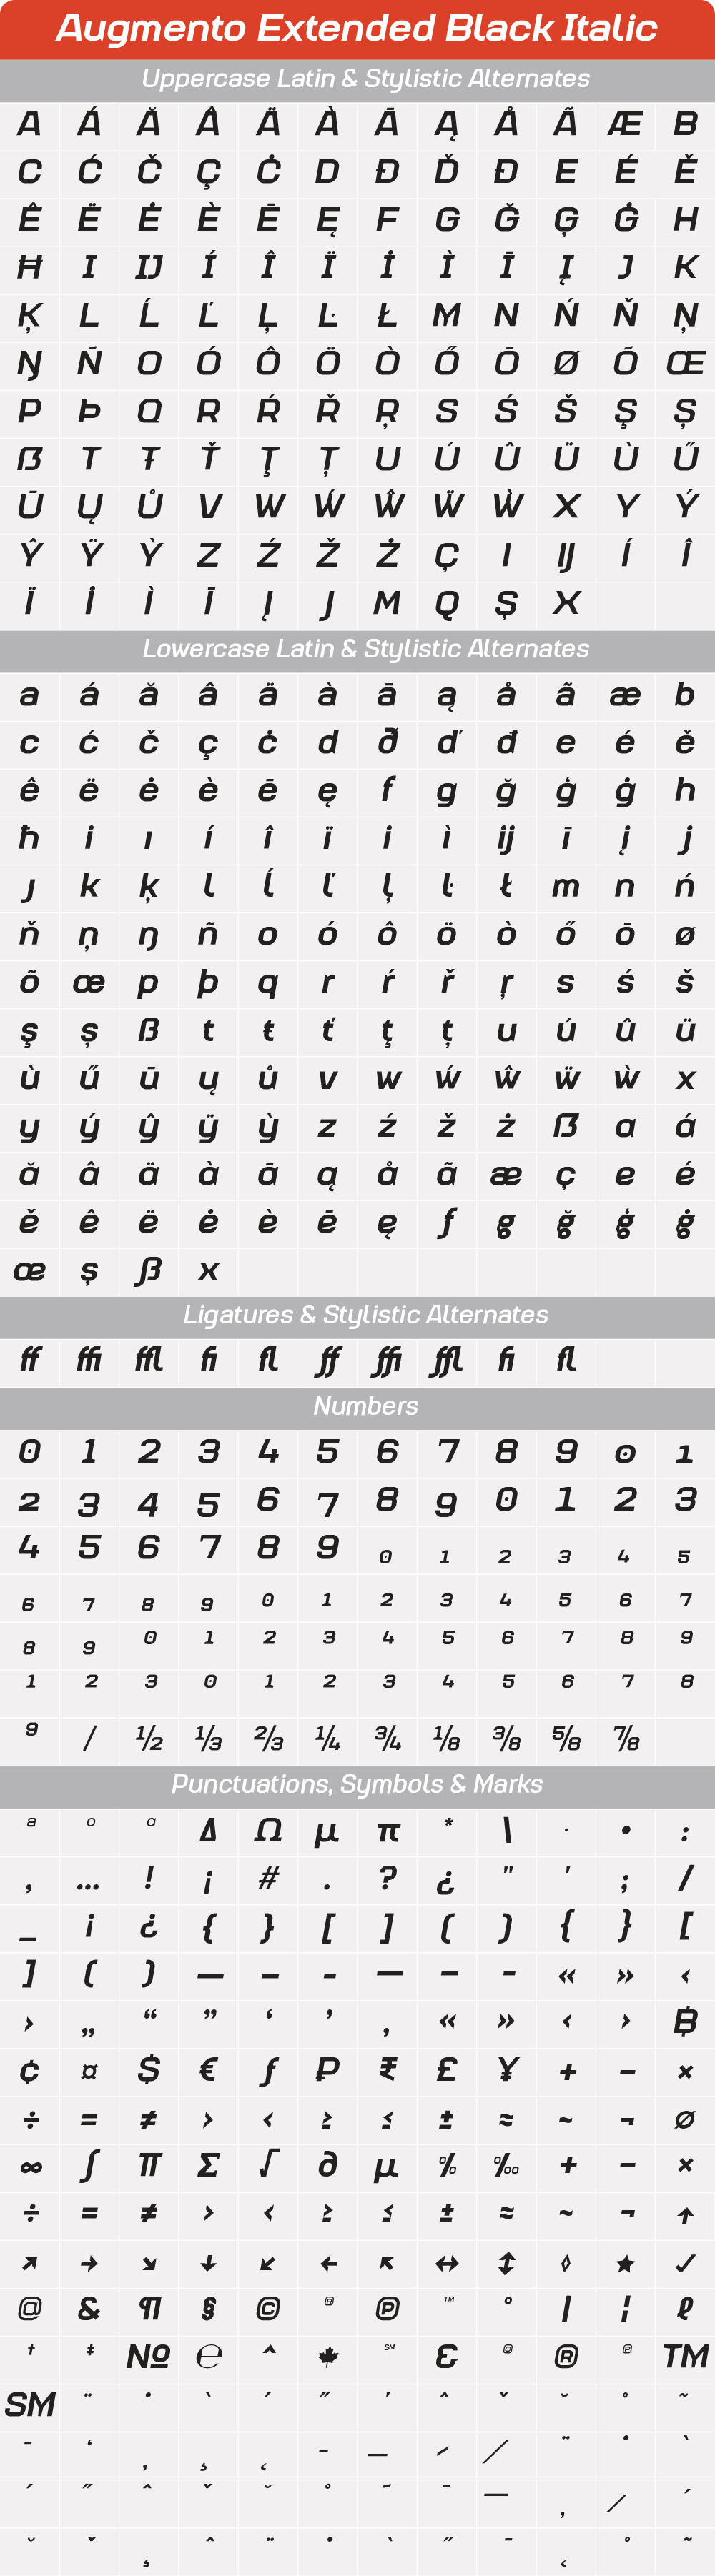 Extended Black ItalicAugmento-GlyphTable.png